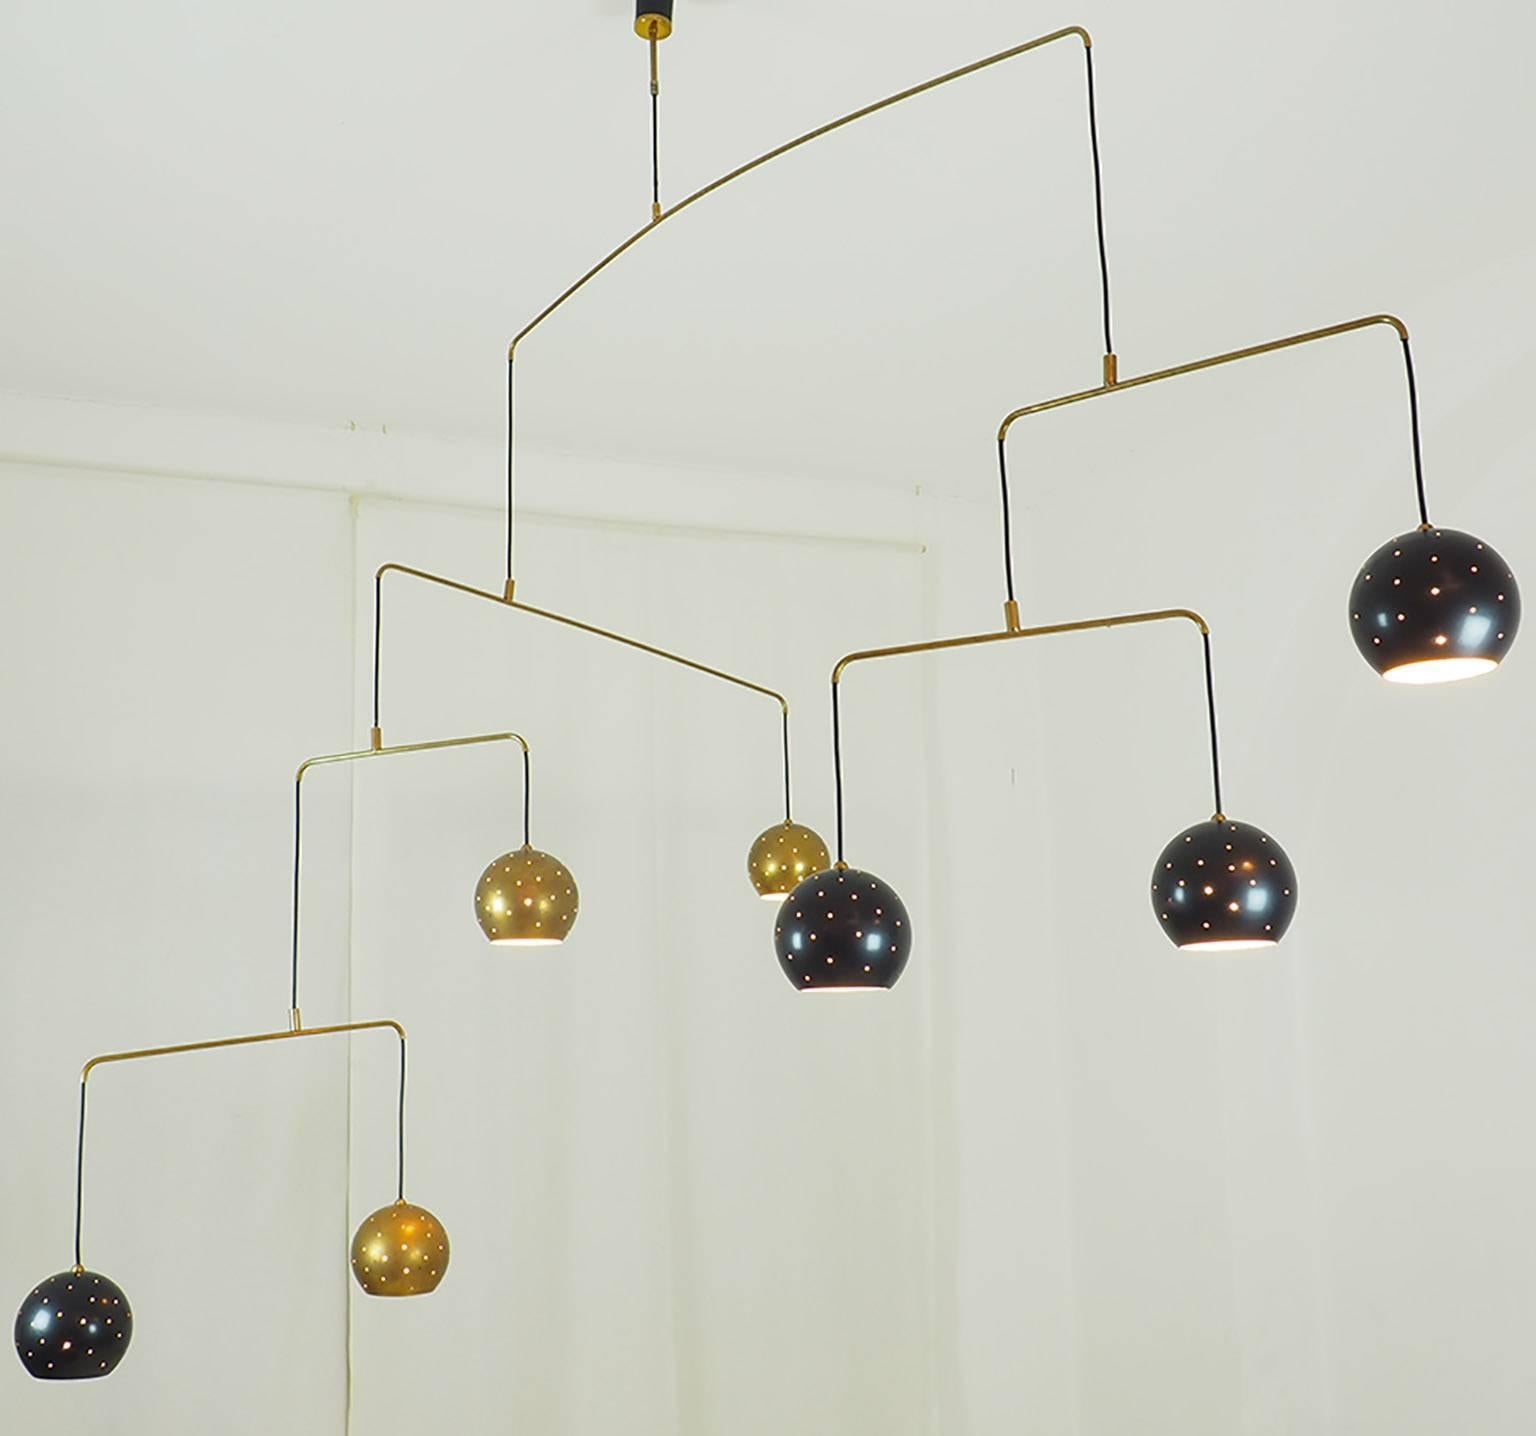 Original vintage  brass Mobile chandelier .
Large, magic and poetical mobile chandelier with brass and black suspending spheres; it can move with the flow of air.
Wholly in balance through its thin brass arms and the interaction of the weights of